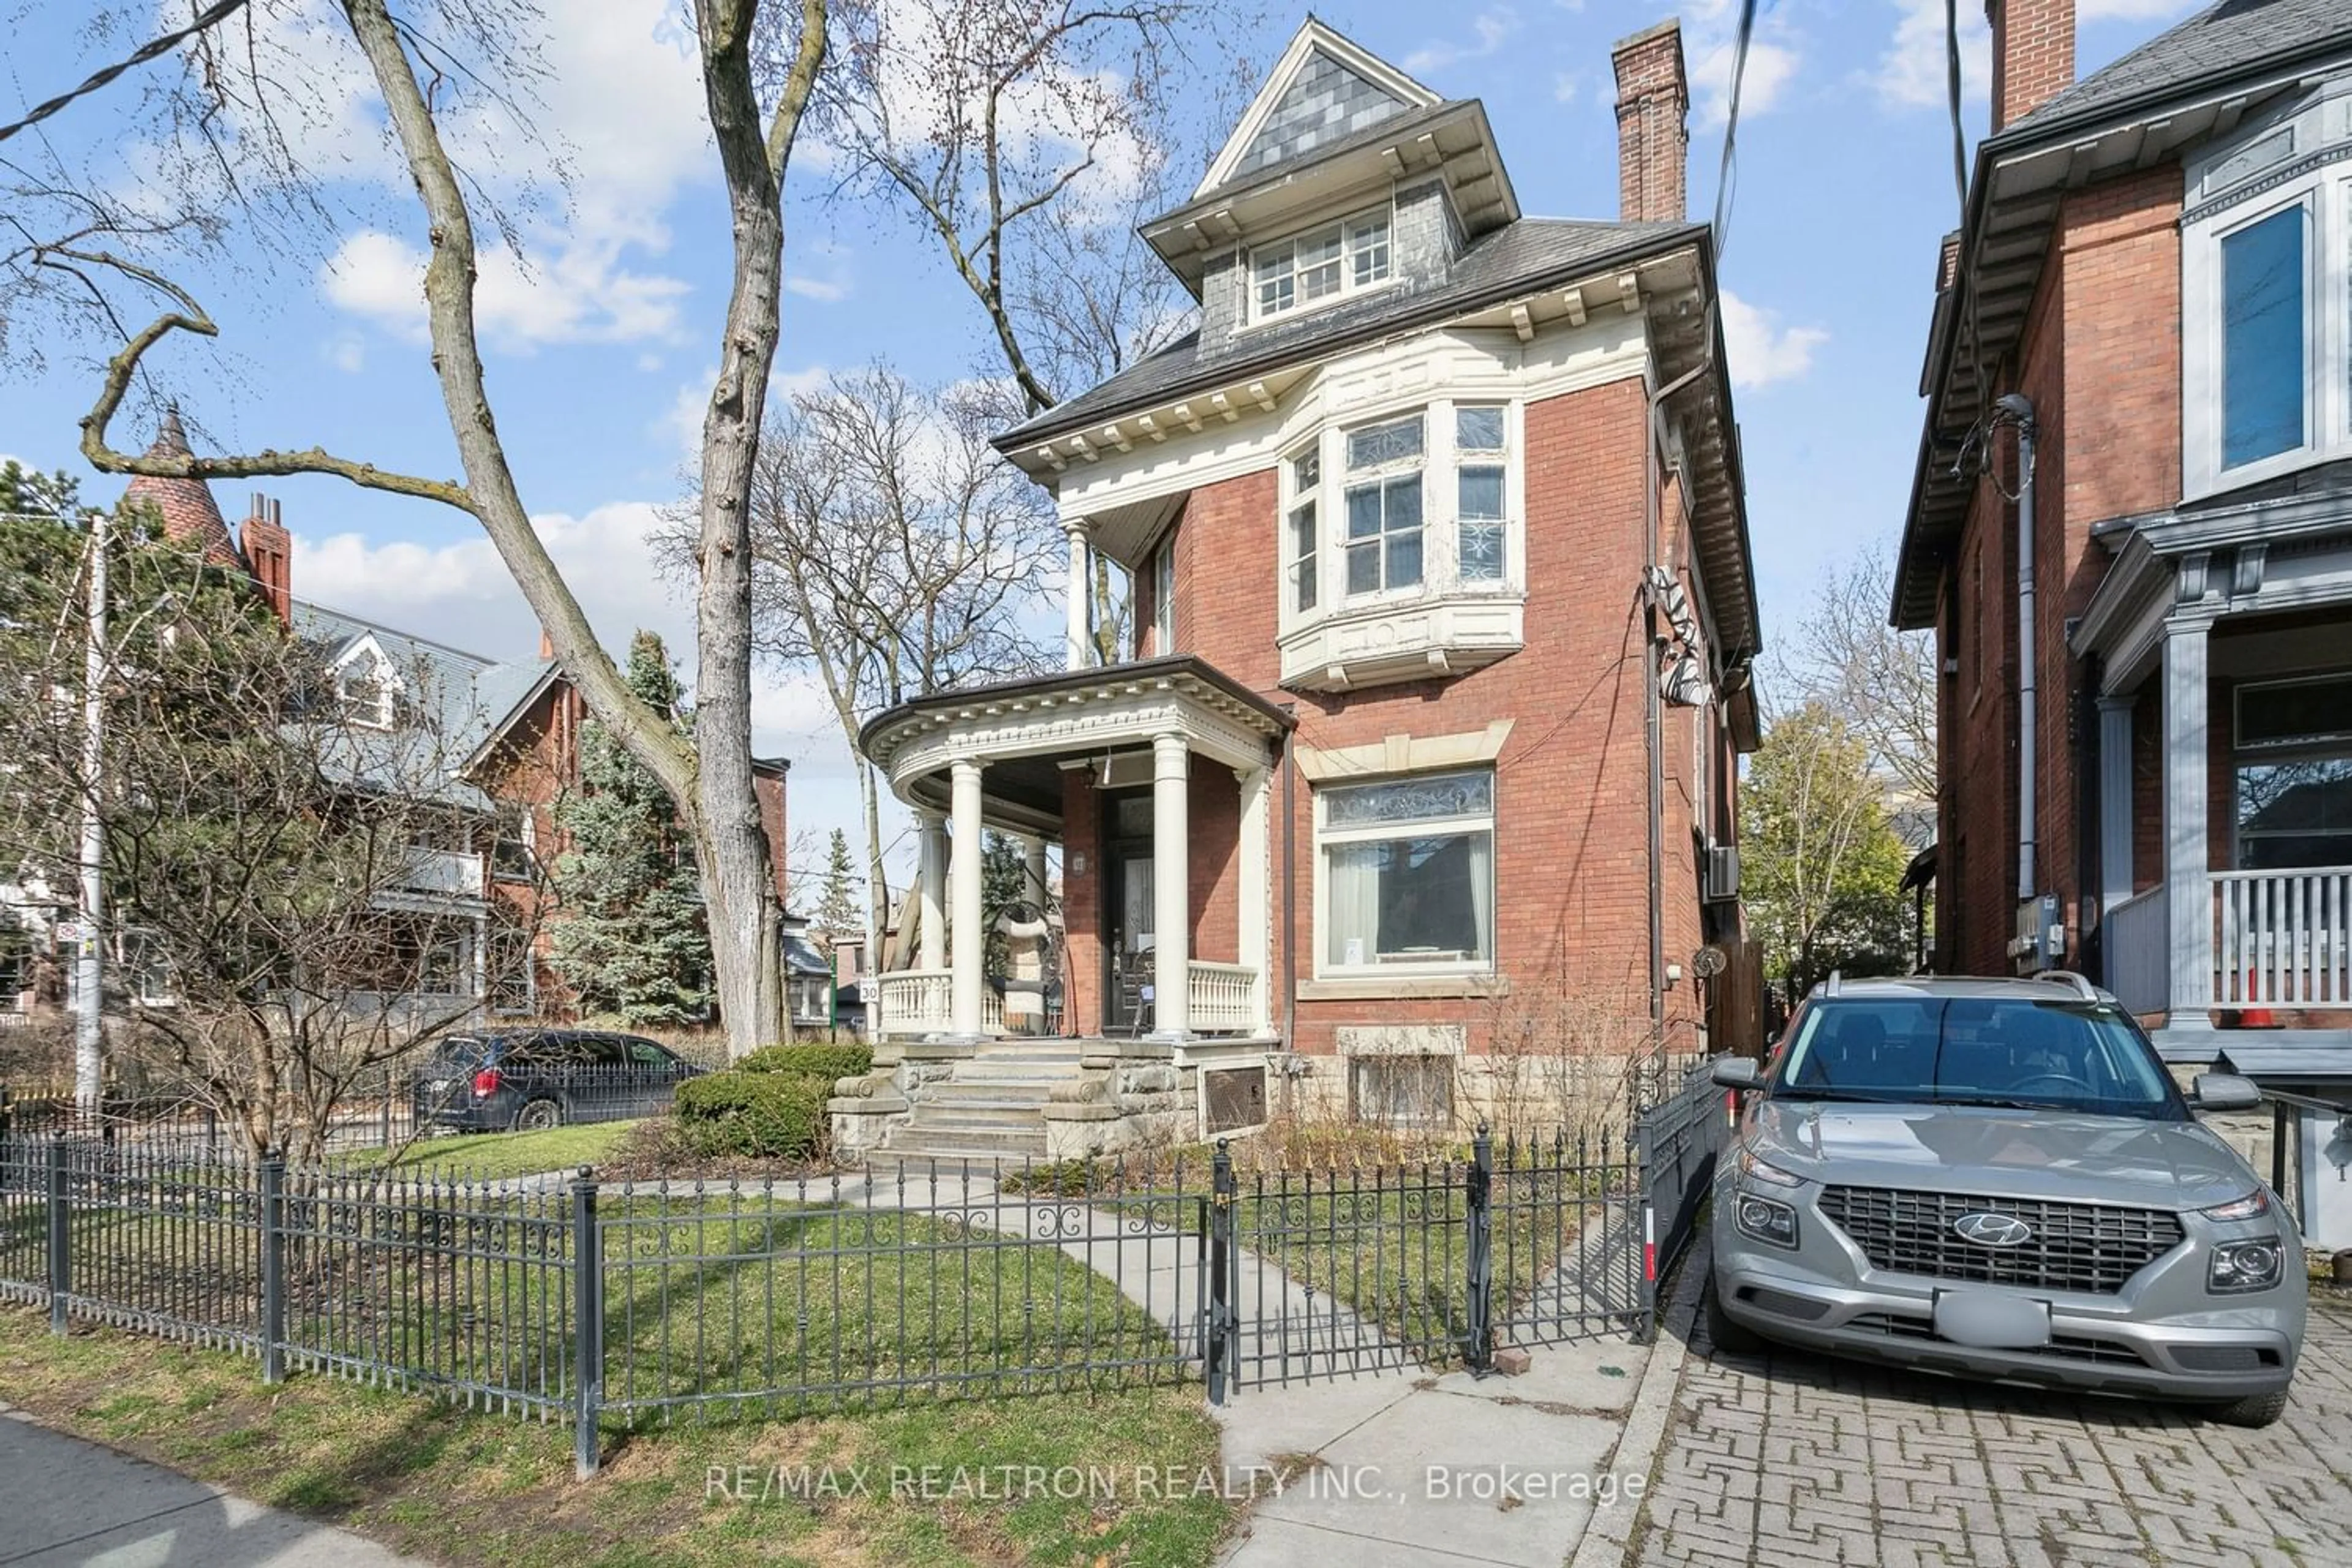 Home with brick exterior material for 177 Dowling Ave, Toronto Ontario M6K 3B1